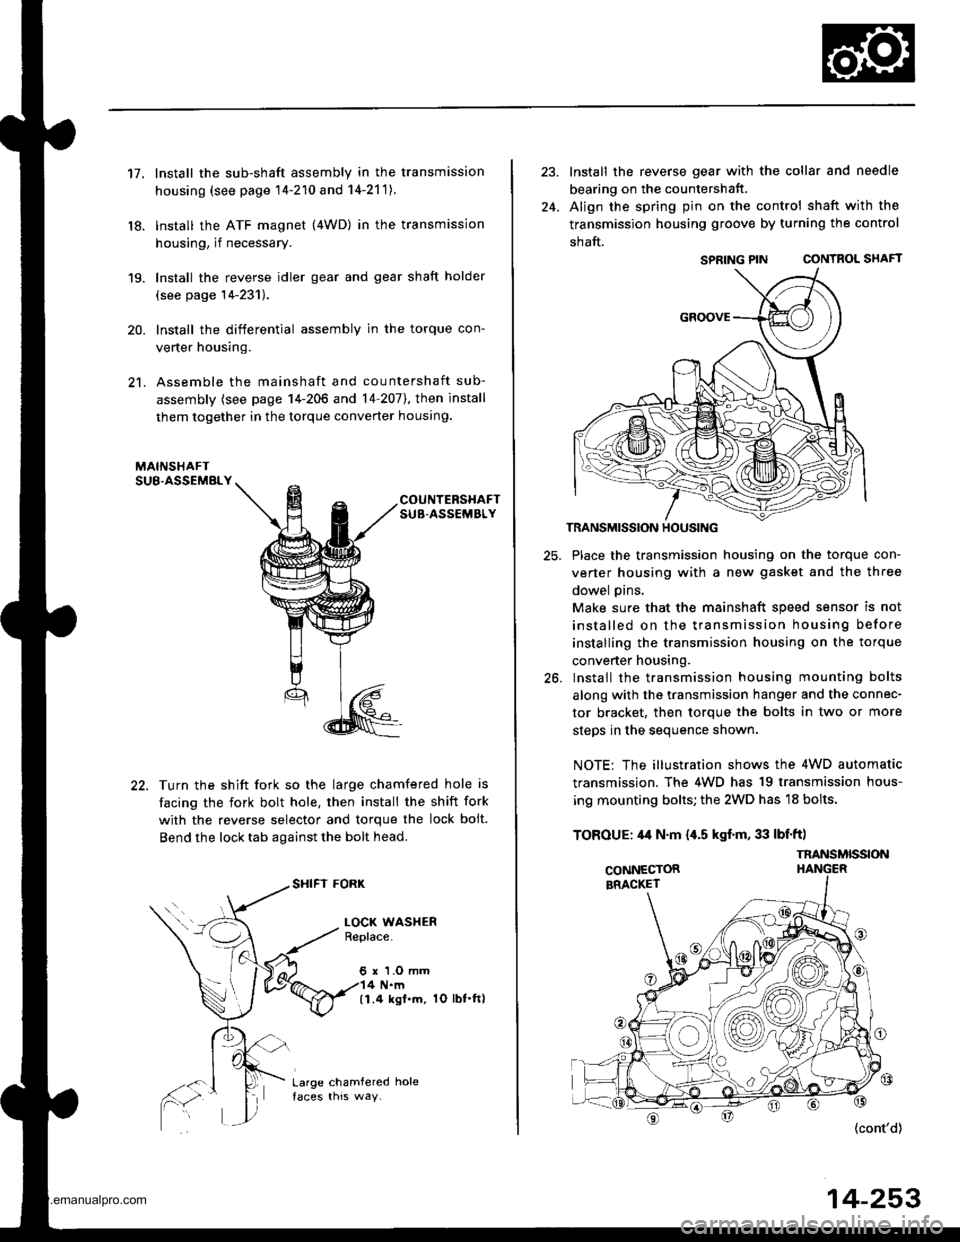 HONDA CR-V 1998 RD1-RD3 / 1.G Service Manual 
17.
18.
19.
20.
21.
Install the sub-shaft assembly in the transmission
housing (see page 14-210 and 14-2111.
lnstall the ATF magnet (4WD) in the transmission
housing, if necessary.
Install the rever